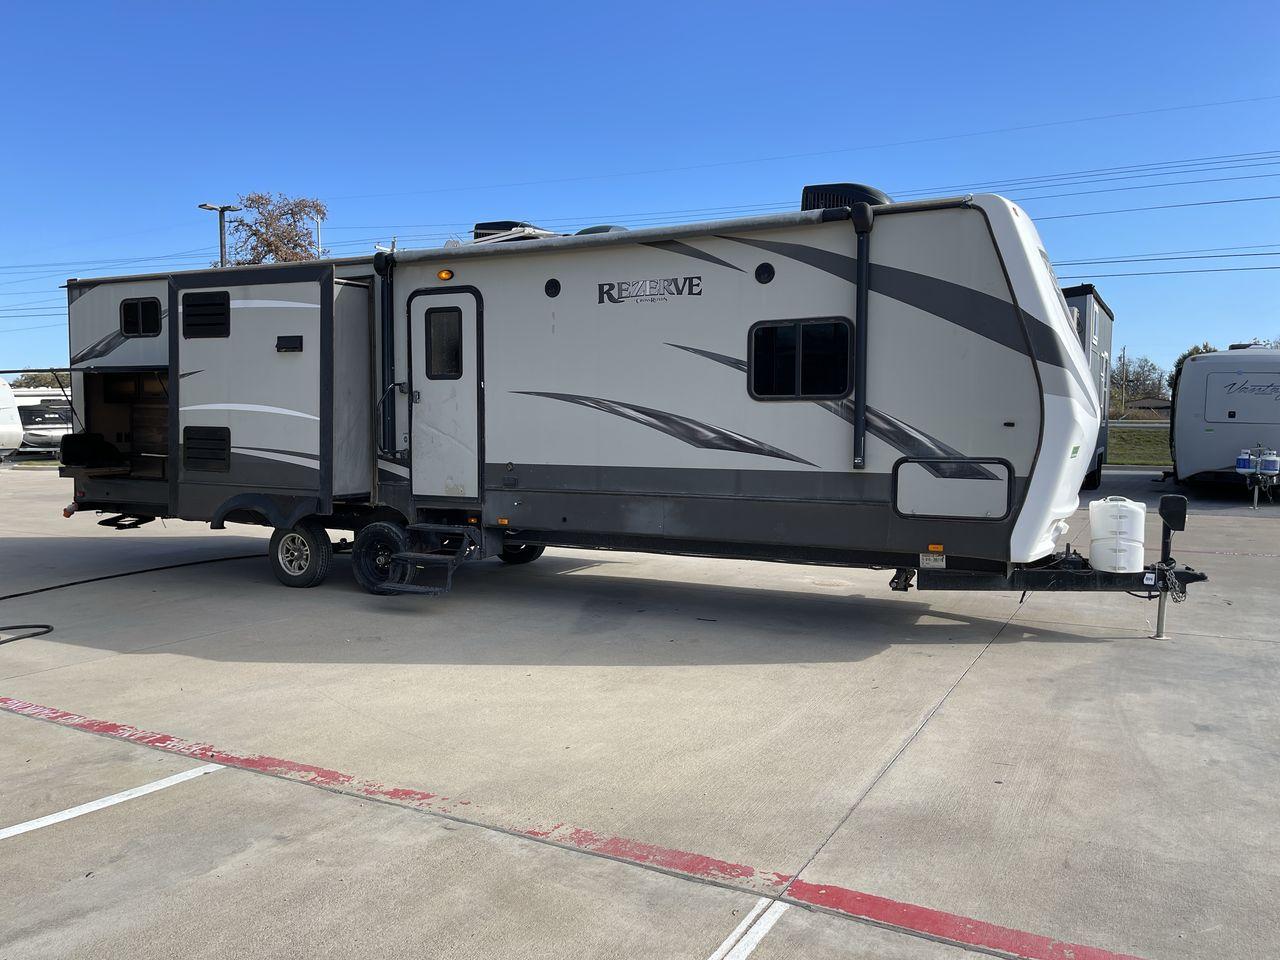 2017 WHITE VOLANTE RTZ33BH (4V0TC3327HB) , Length: 36.58 ft. | Dry Weight: 8,864 lbs. | Gross Weight: 10,250 lbs. | Slides: 3 transmission, located at 4319 N Main Street, Cleburne, TX, 76033, (817) 221-0660, 32.435829, -97.384178 - The 2017 VOLANTE RTZ33BH offers a spacious interior with a layout that is perfect for families or large groups. Its length of 33 feet offers ample room for your adventures. Inside, you'll find a comfortable sleeping space with a bunkhouse layout, making it suitable for family trips. The bunkhouse la - Photo #23